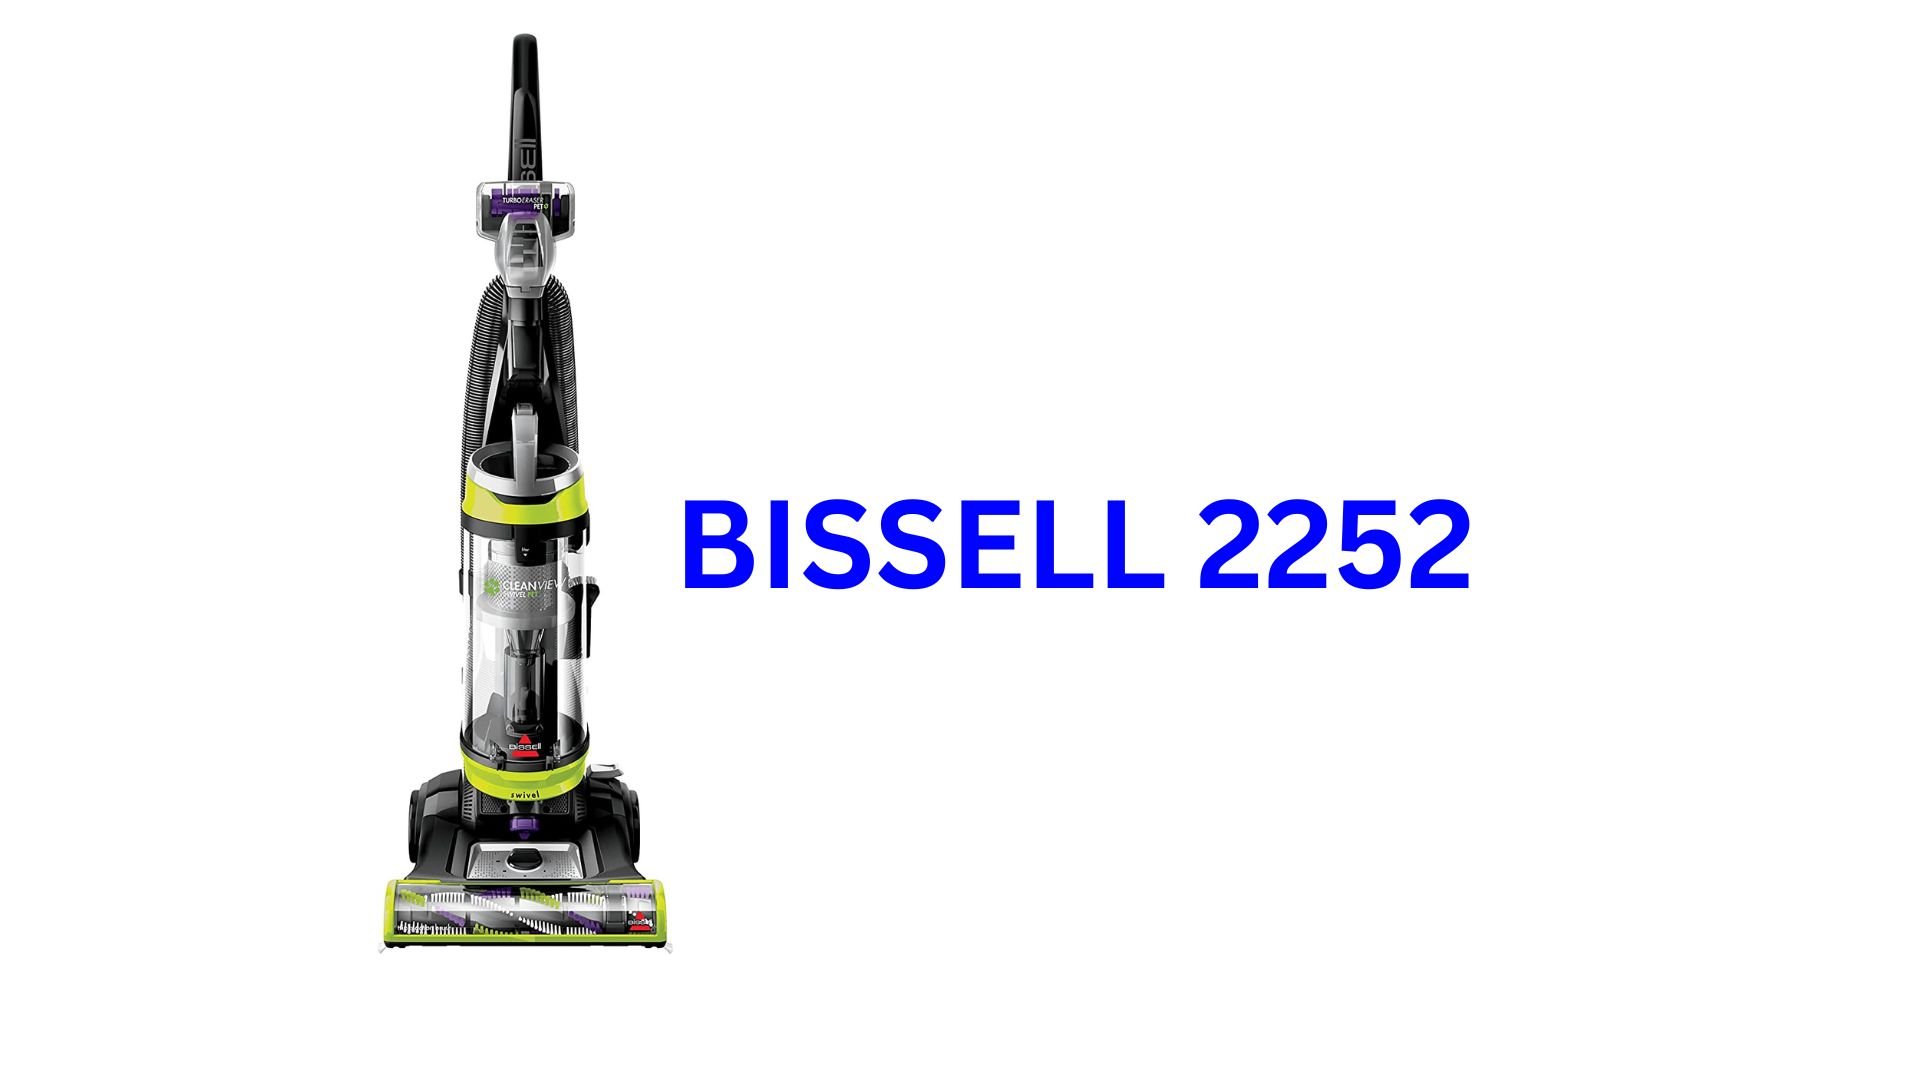  BISSELL 2252 Review